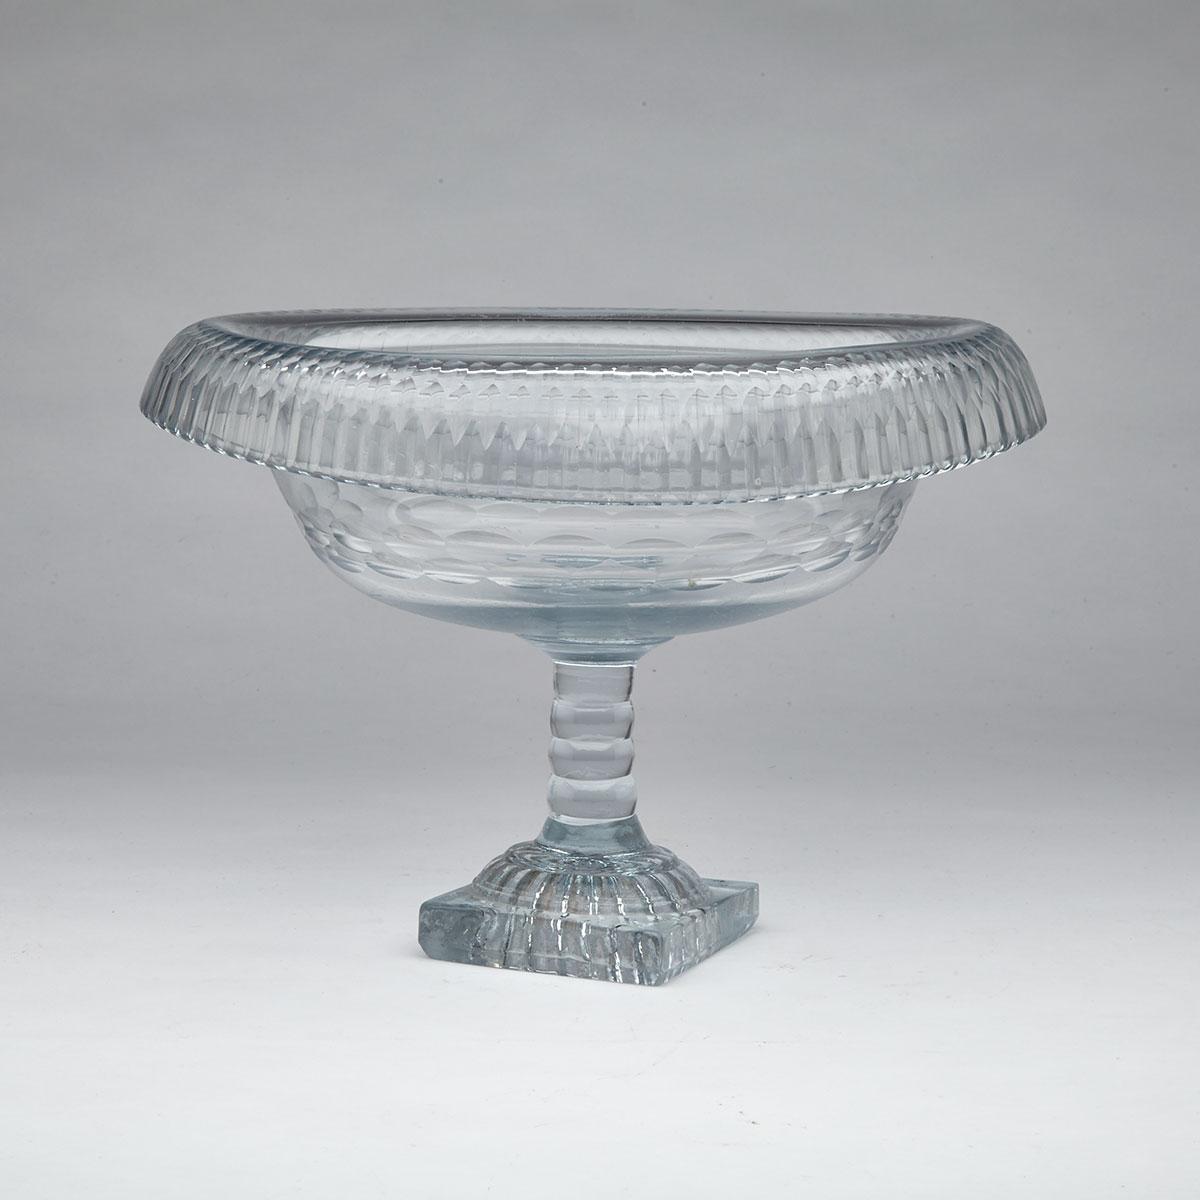 Anglo-Irish Cut Glass Pedestal Footed Oval Bowl, c.1800